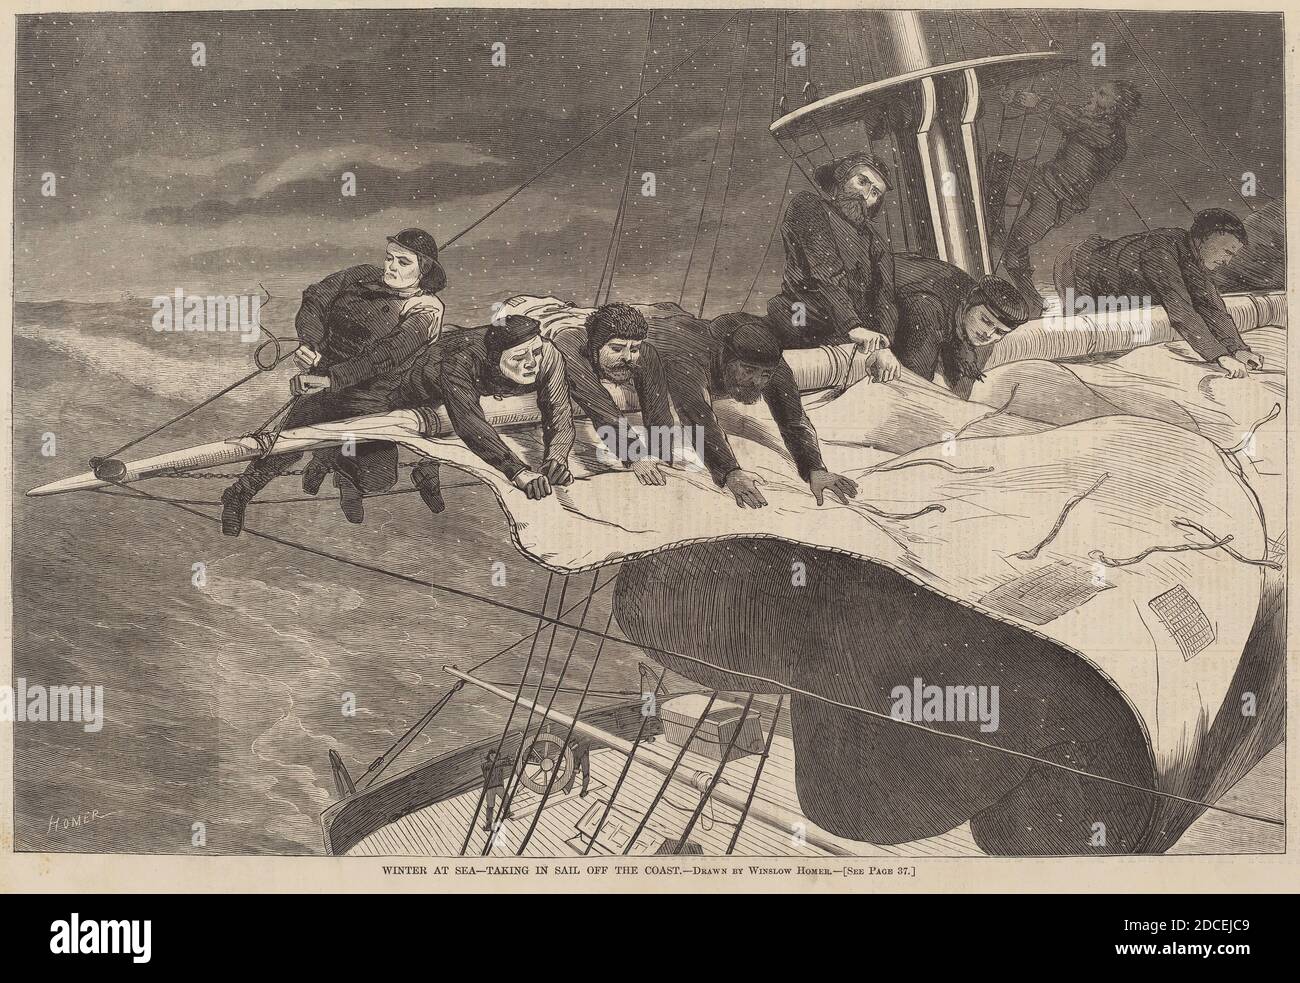 American 19th Century, (artist), Winslow Homer, (artist after), American, 1836 - 1910, Winter at Sea - Taking in Sail Off the Coast, From 'Harper's Weekly', January 16, 1869, p.40, (series), published 1869, wood engraving Stock Photo